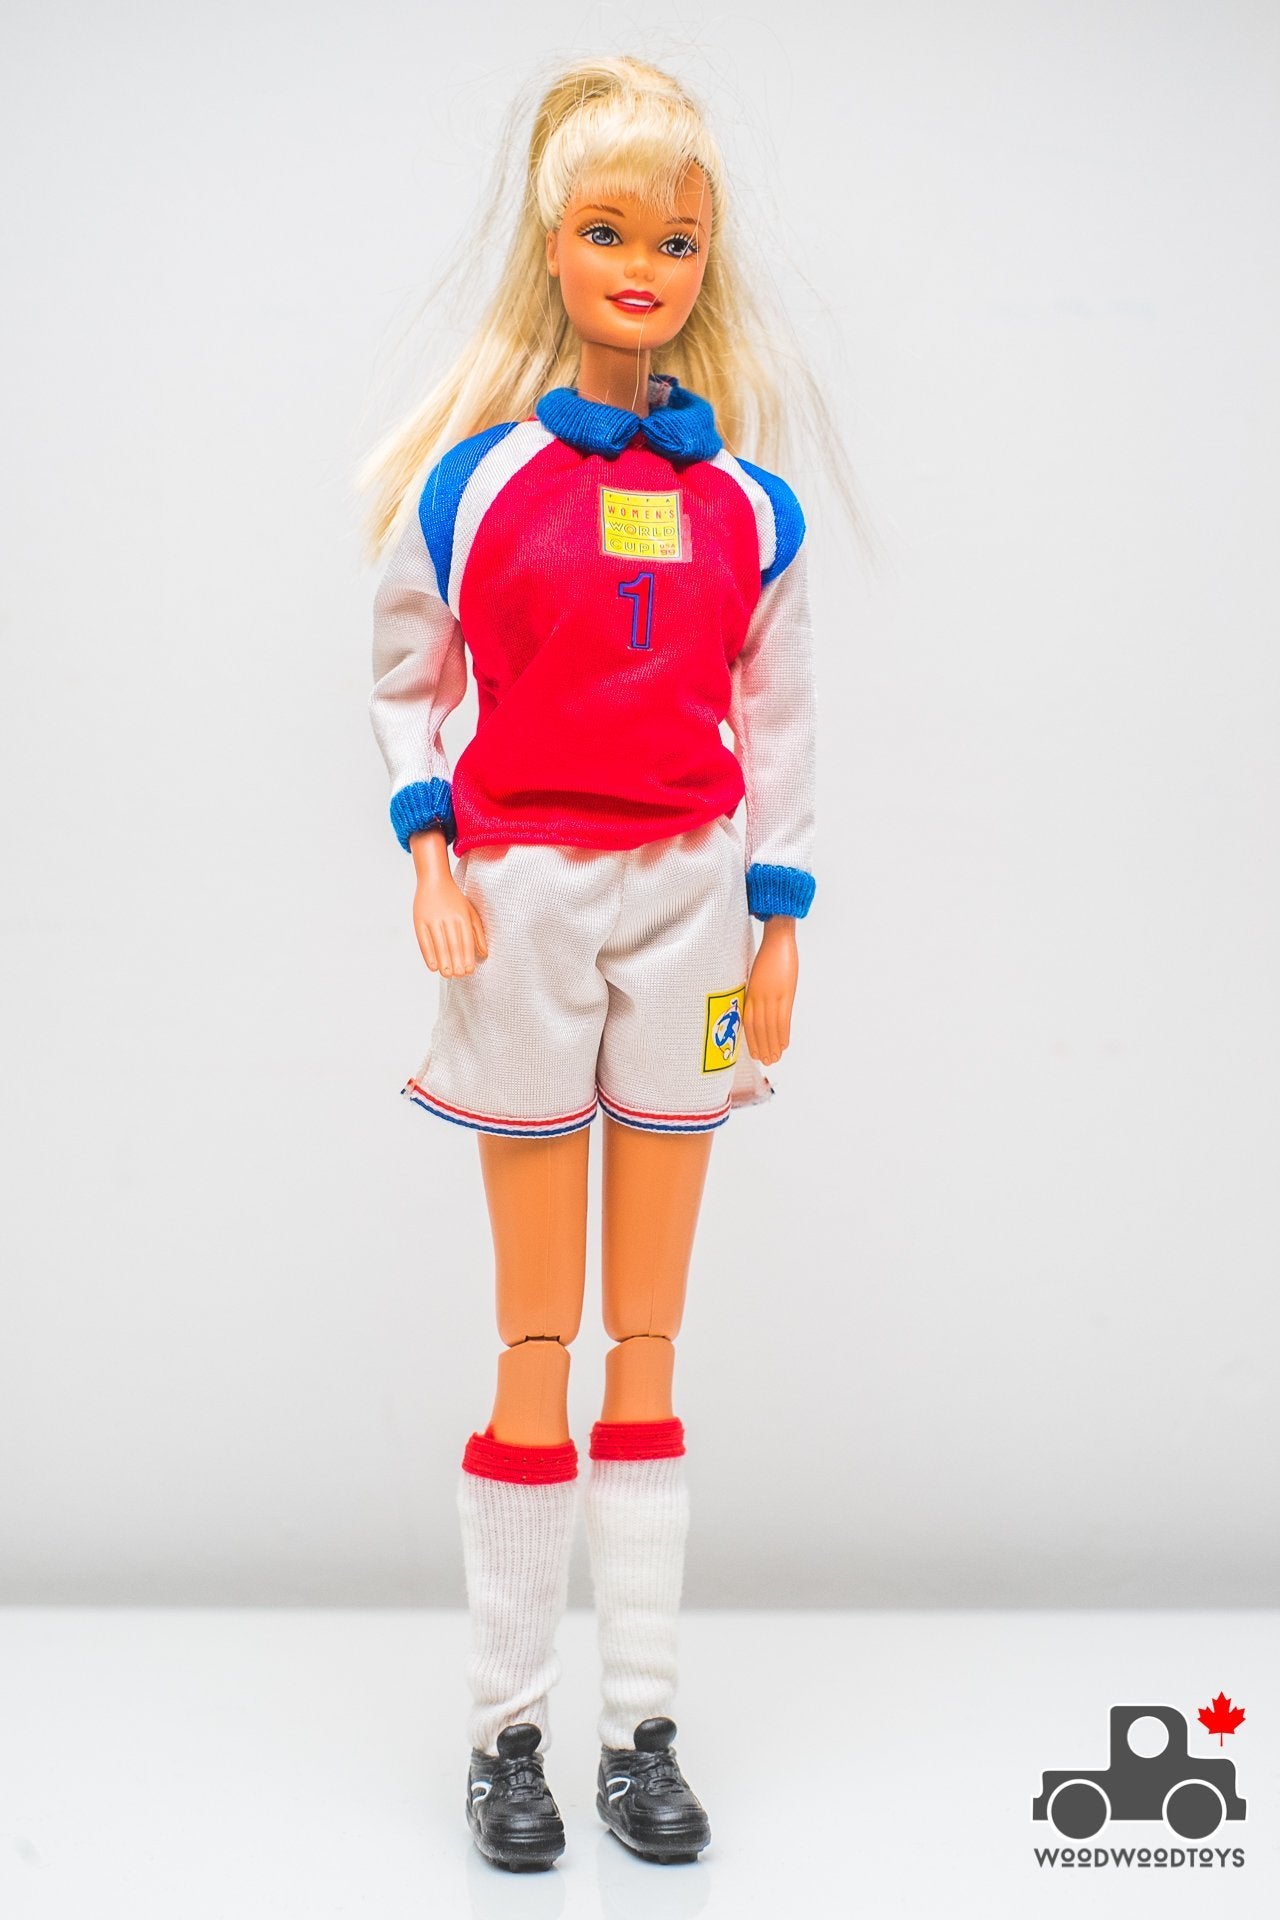 Soccer Barbie Doll 1999 USA FIFA Women World Cup Mia Hamm - Wood Wood Toys Canada's Favourite Montessori Toy Store